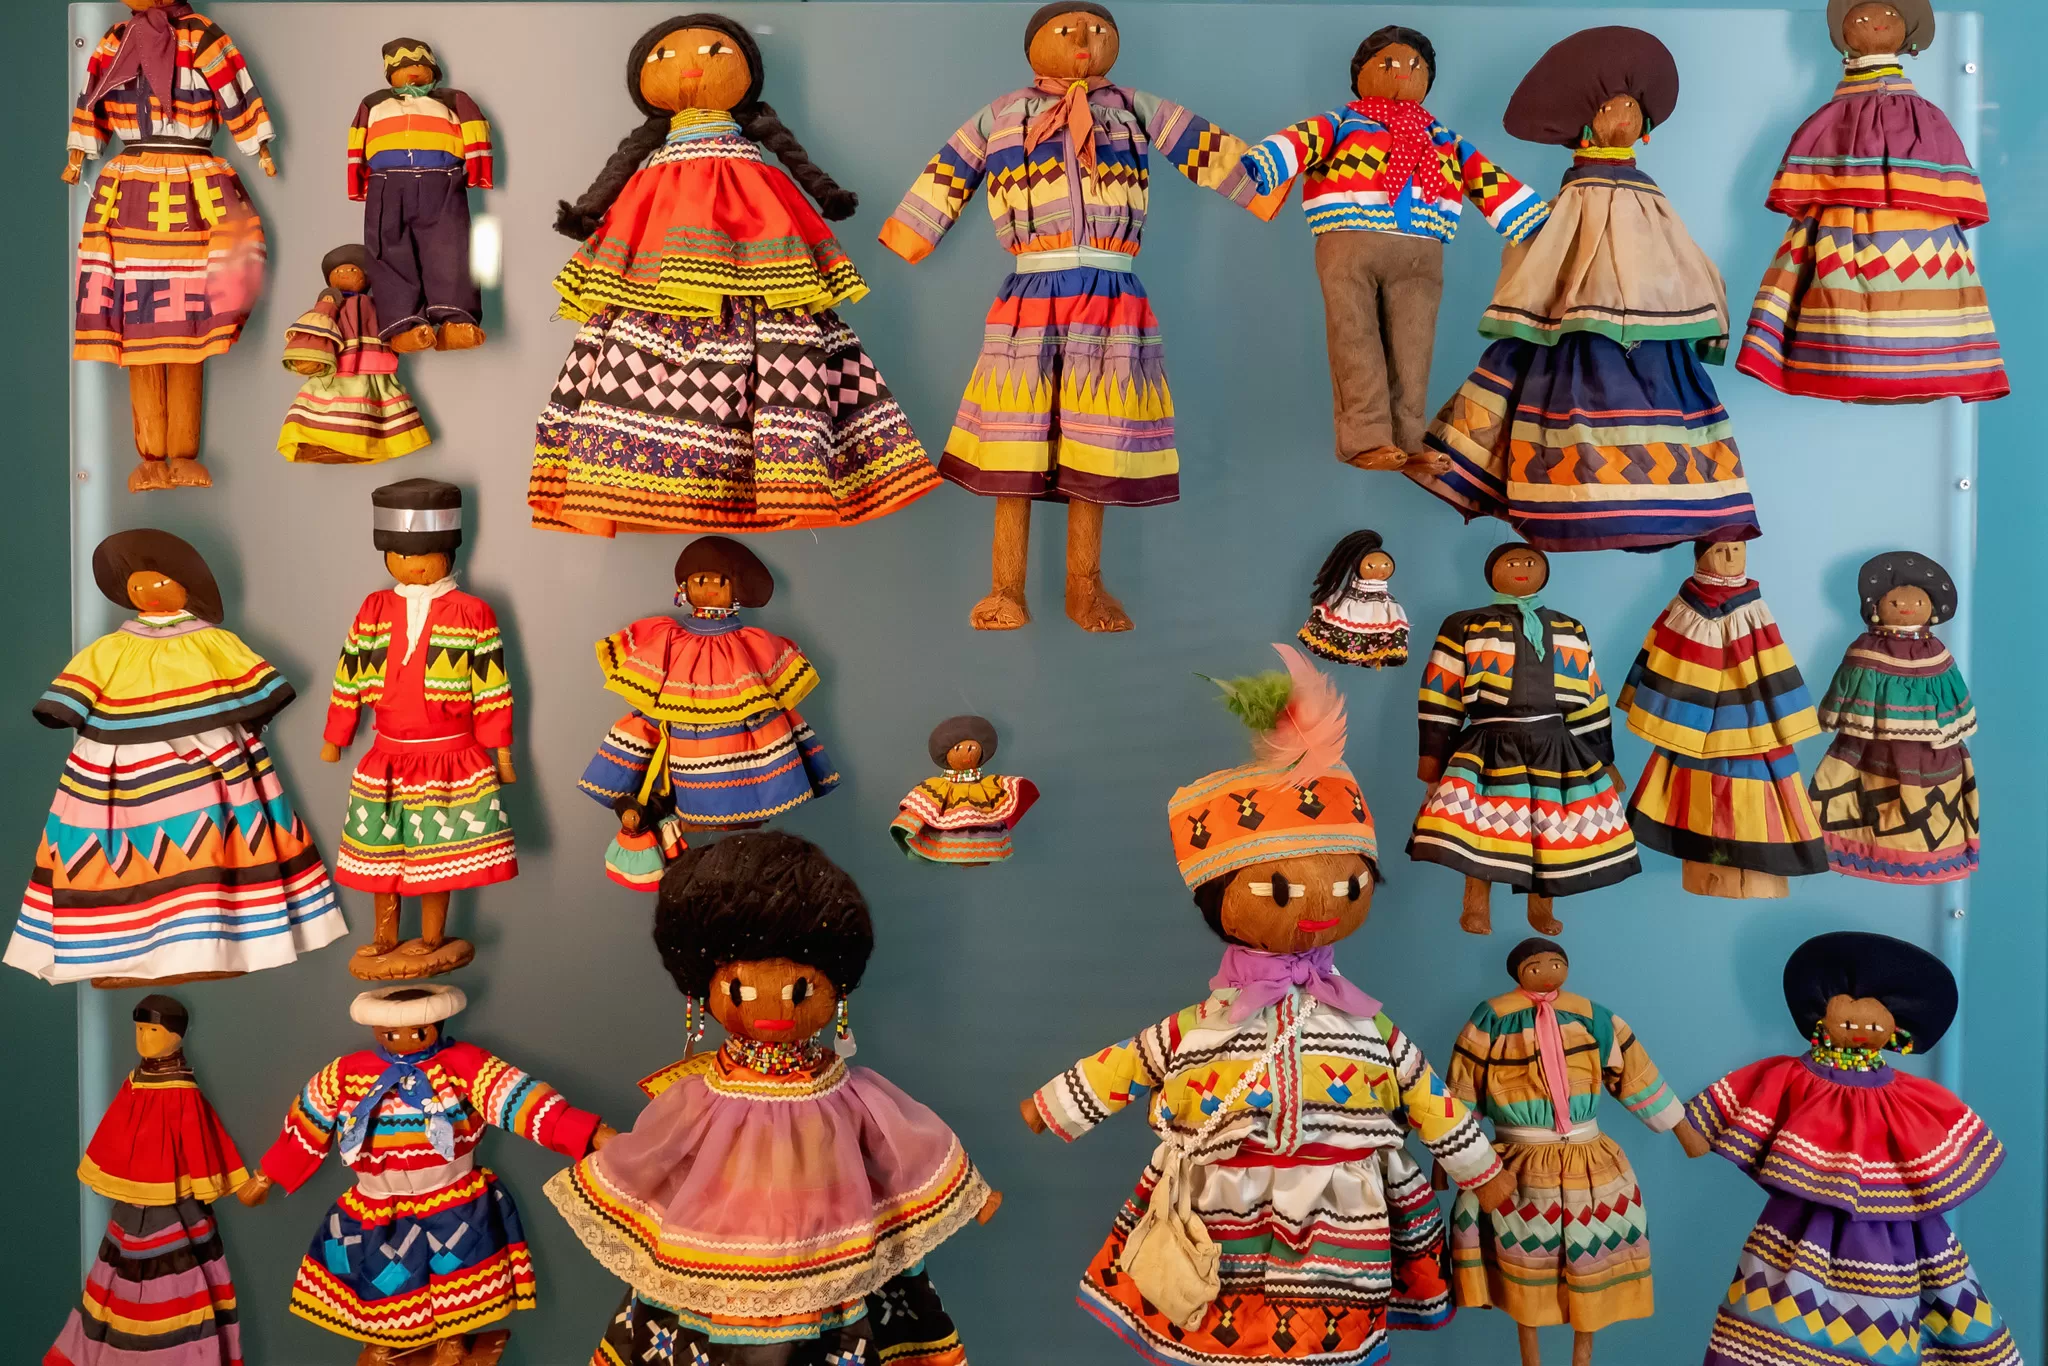 Seminole dolls on display at the Tampa Bay History Center on the Riverwalk in Downtown Tampa Florida